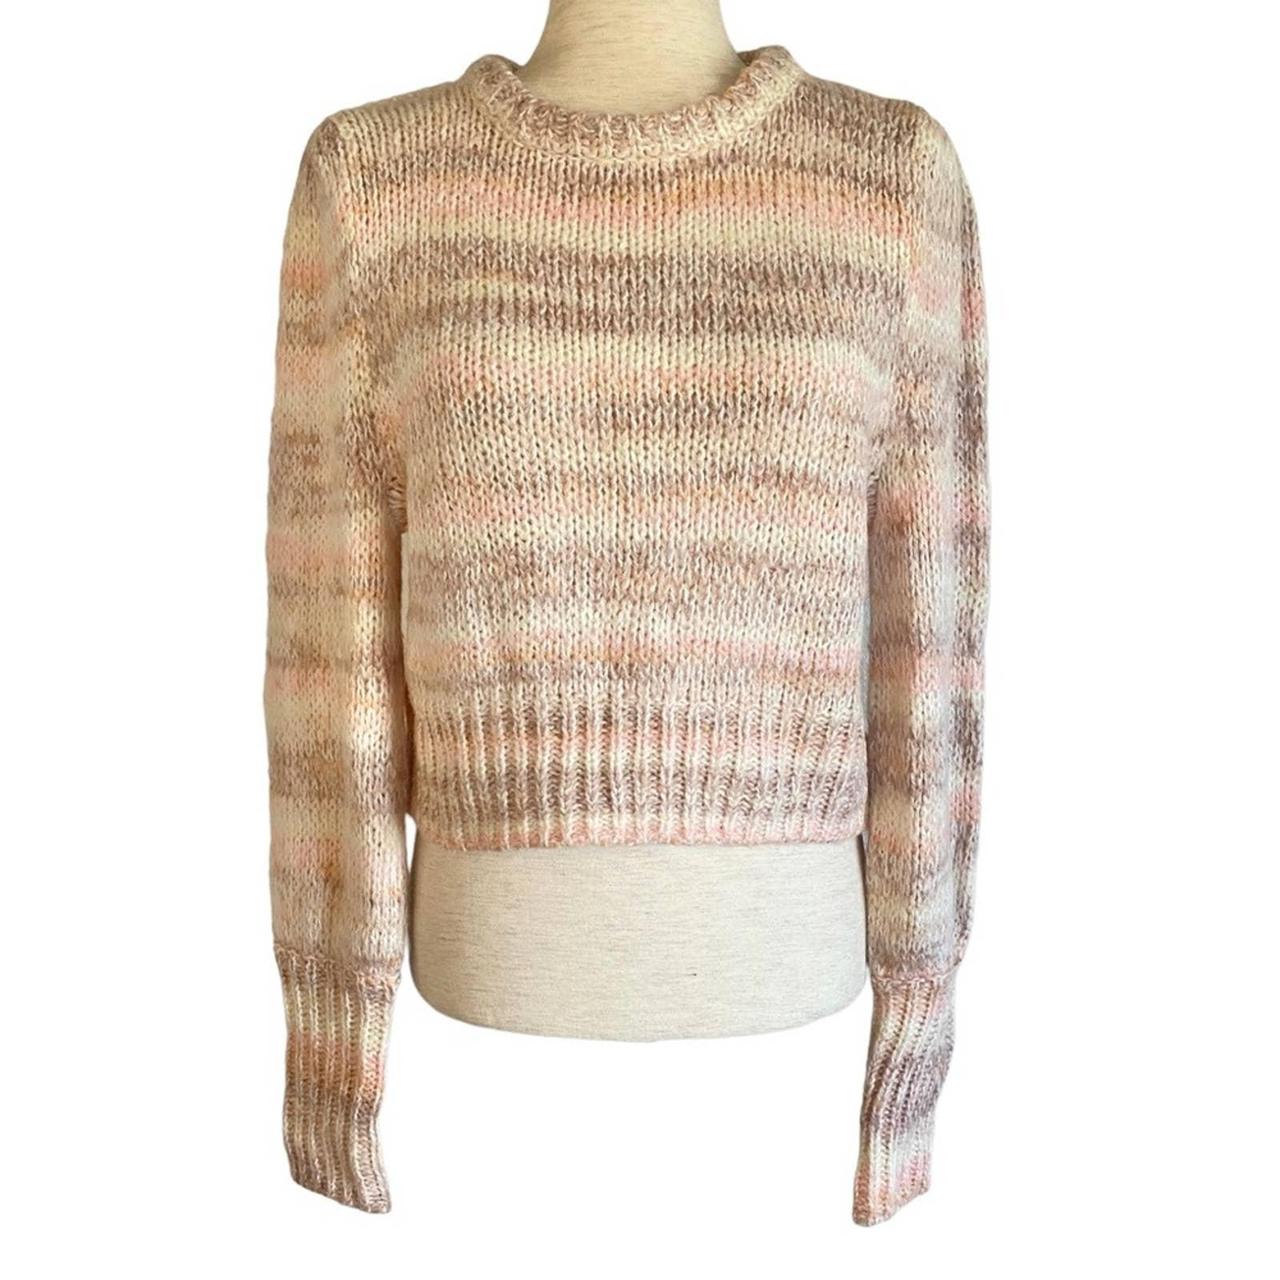 WILD FABLE Sweater Space Dye/Ombre Pink Crew - Depop